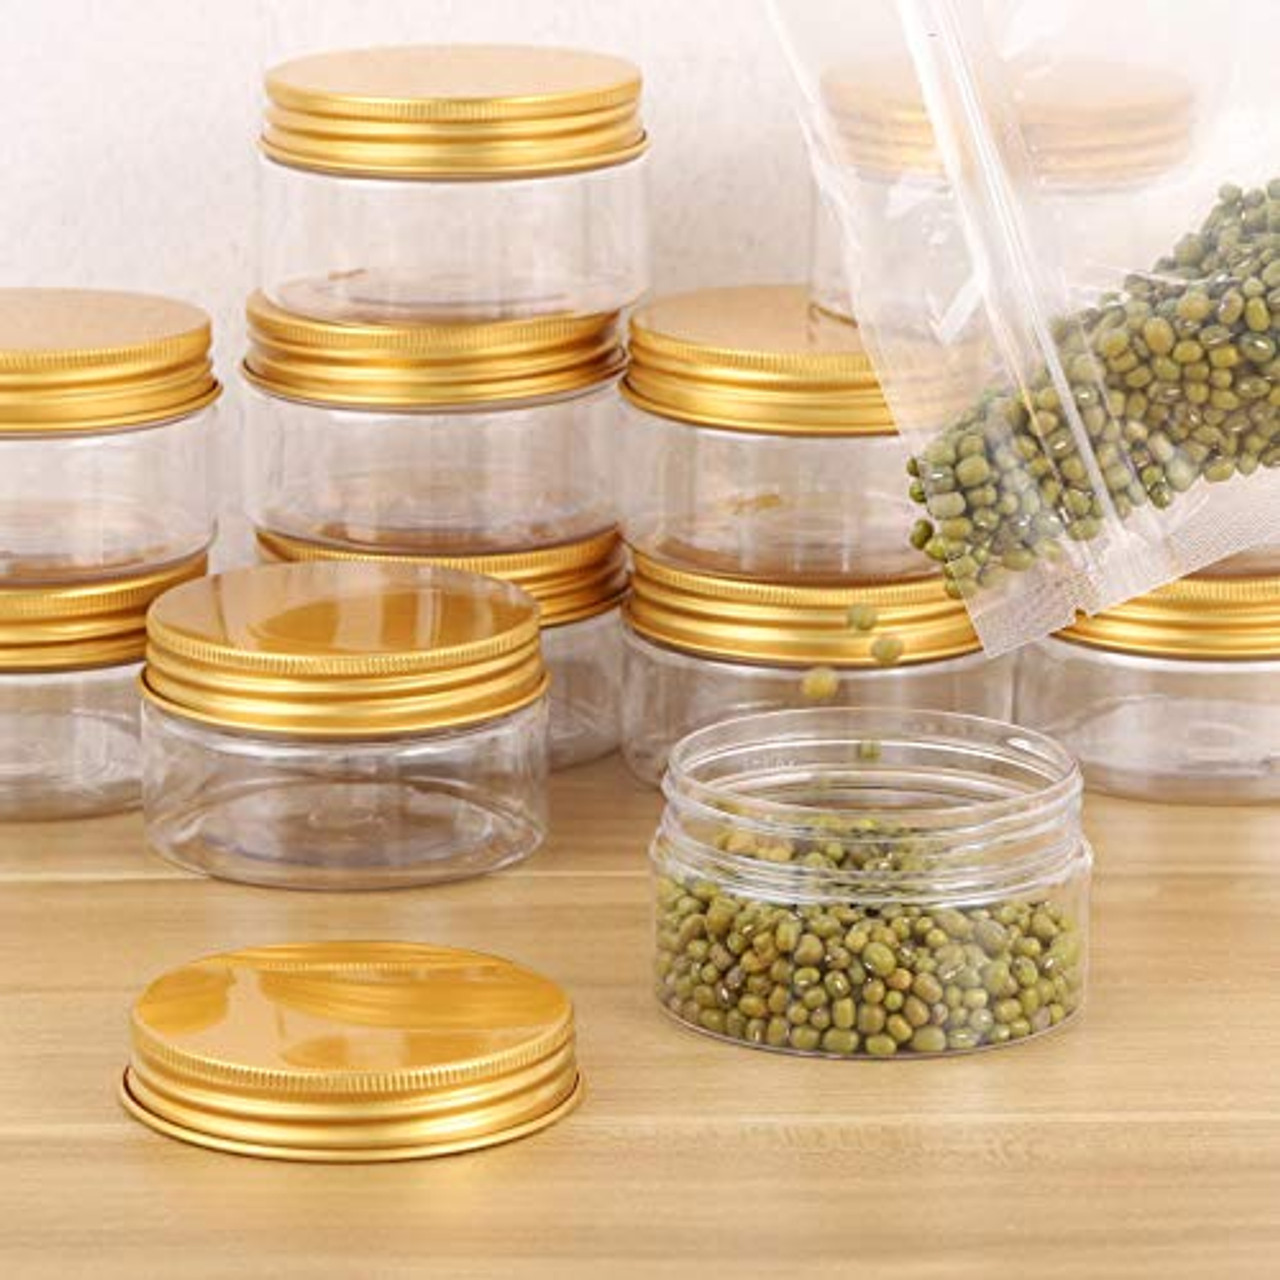 12-Pack 180ml Clear Plastic Jars with Lids, Refillable Empty Round  Containers for Beauty Product, Cream, Lotion, Slime, Gold